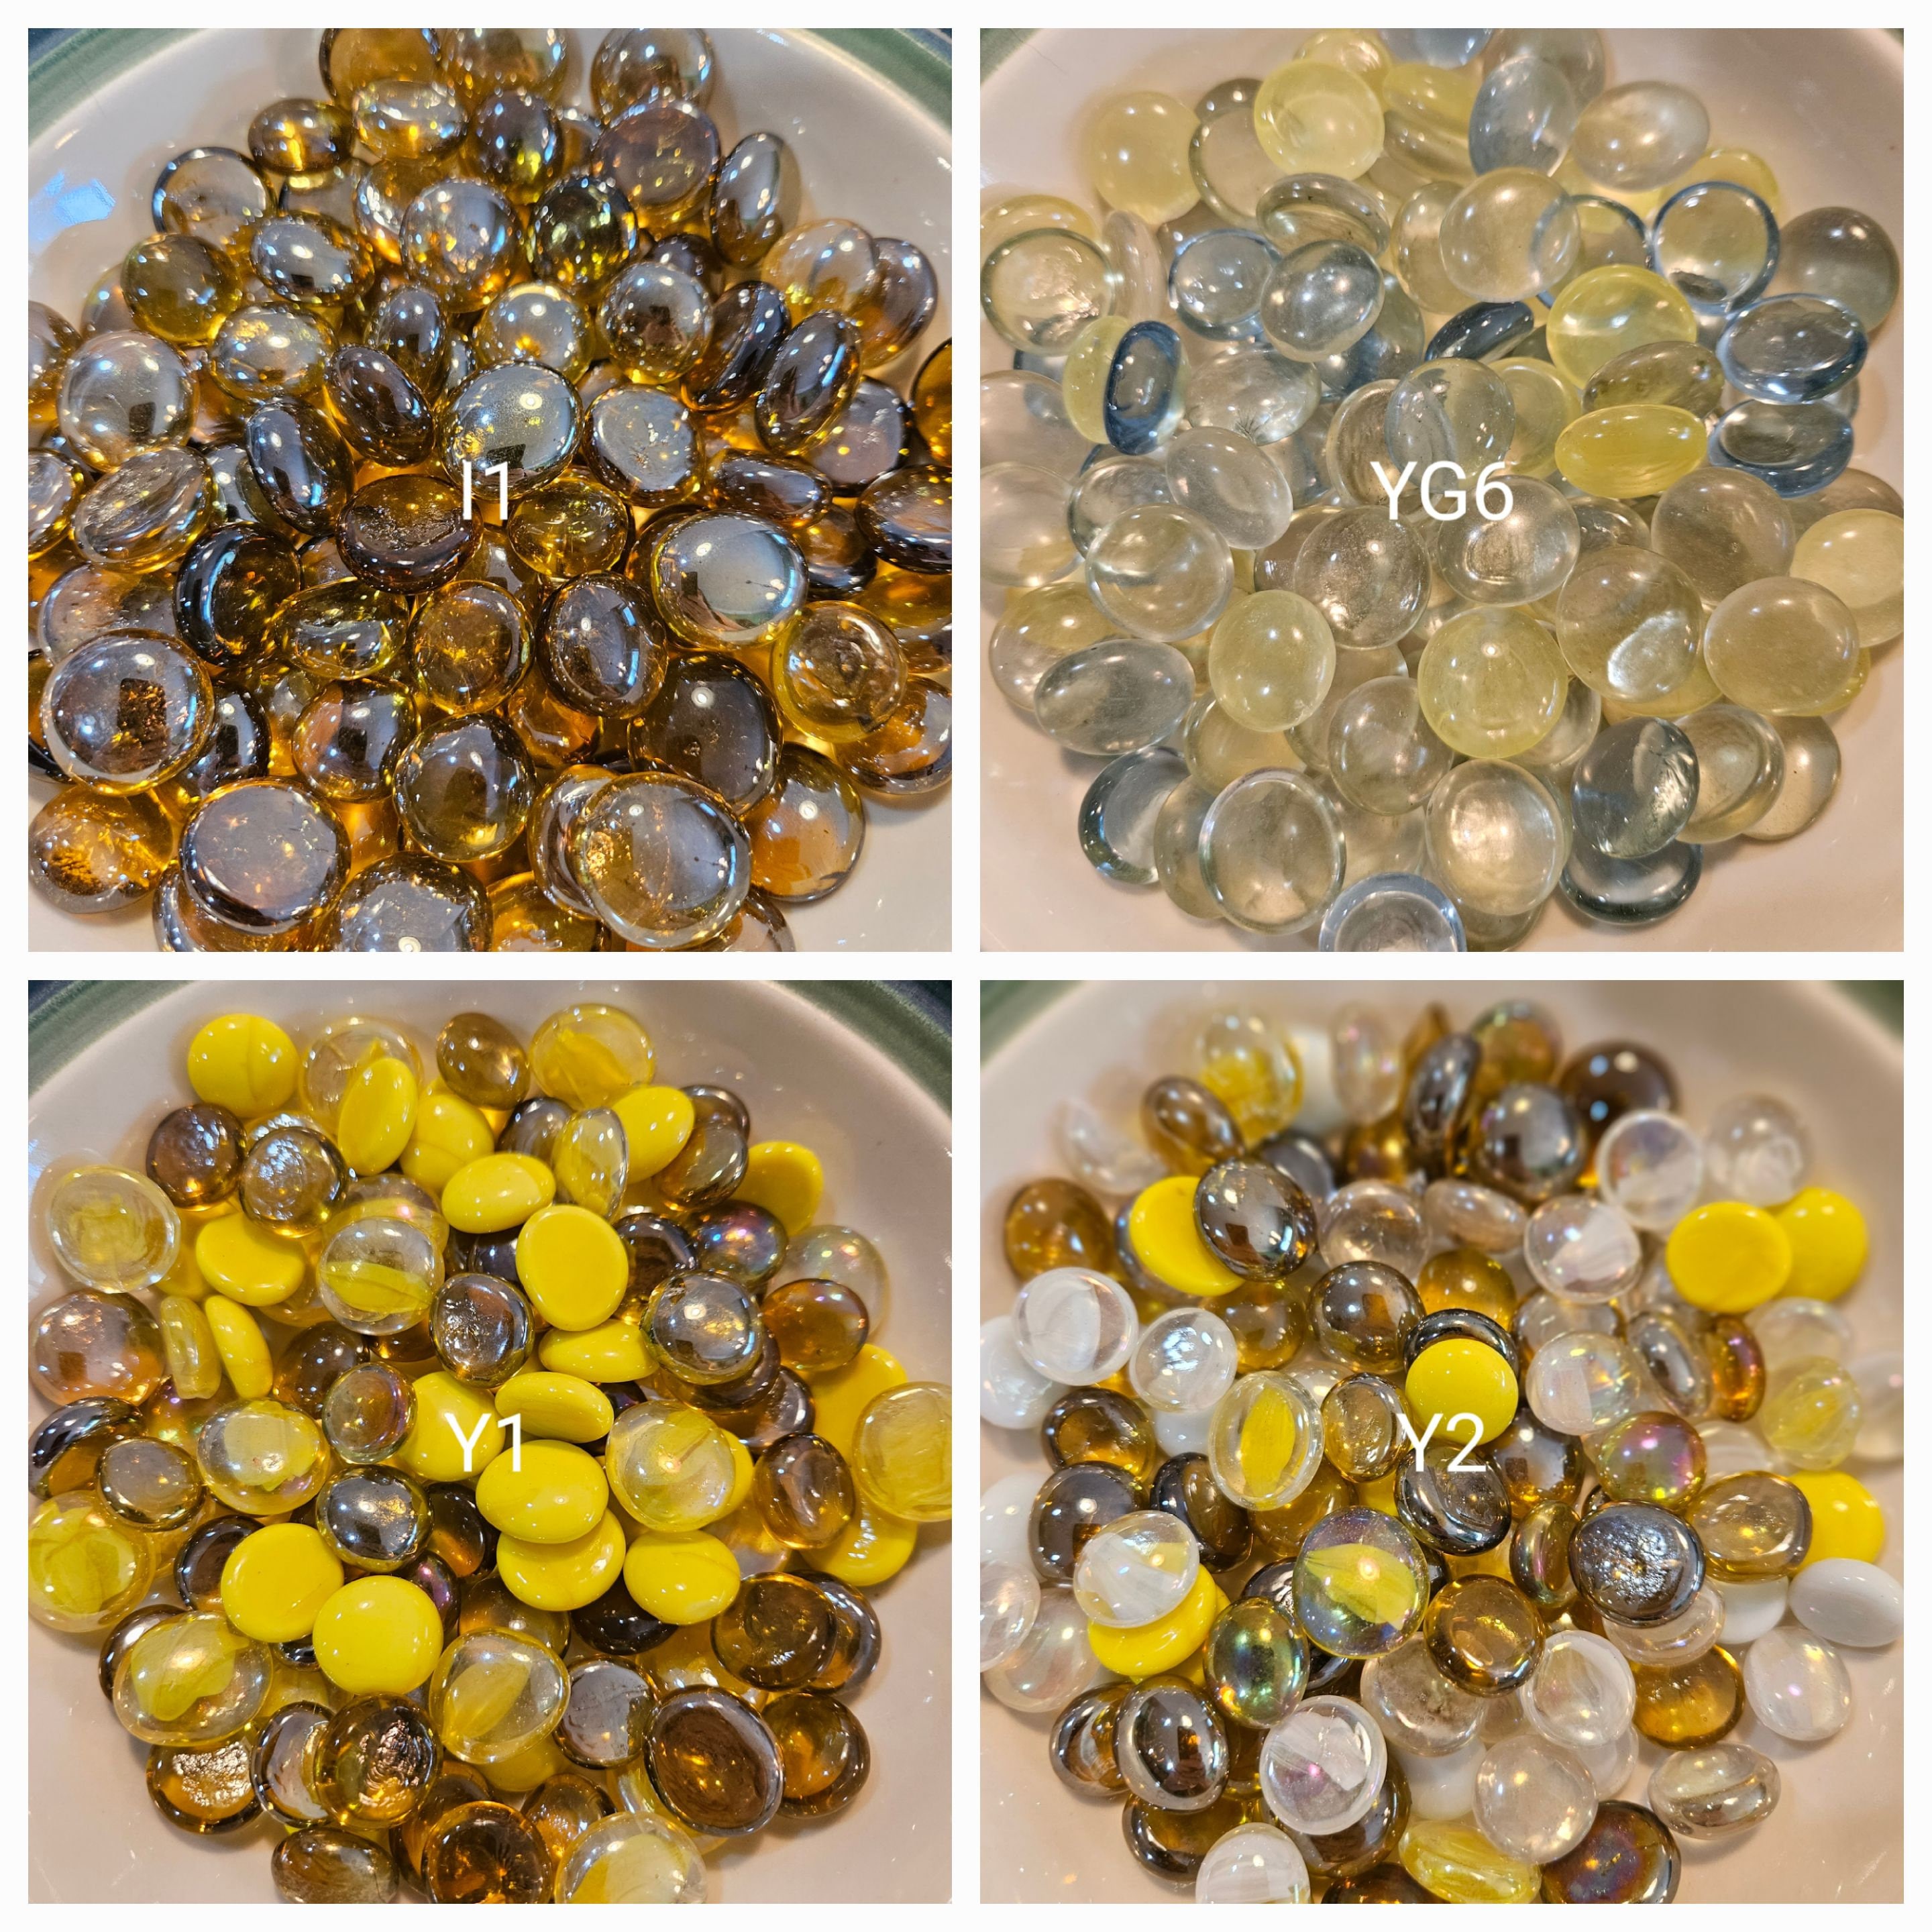 100 YELLOW LUSTER FLAT GLASS MARBLES GEMS, VASE FILLERS, MOSAIC TILES $8.99